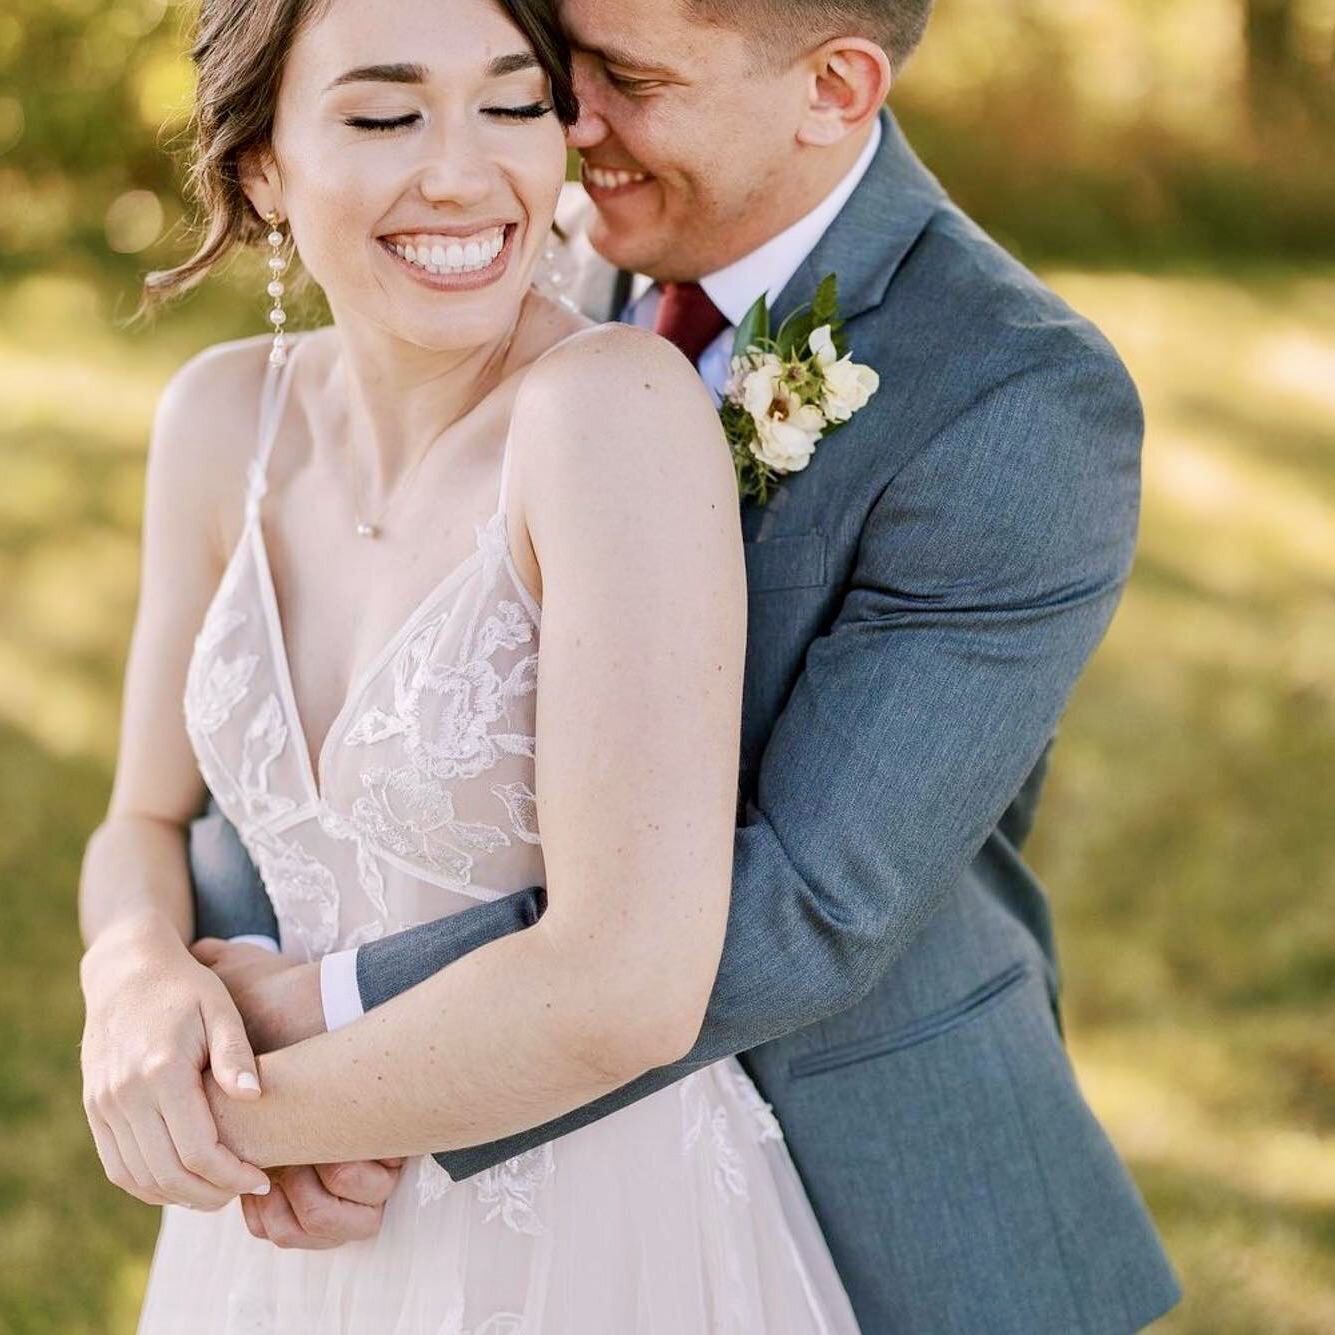 Groom embraces his bride from behind as they smile broadly on their wedding day